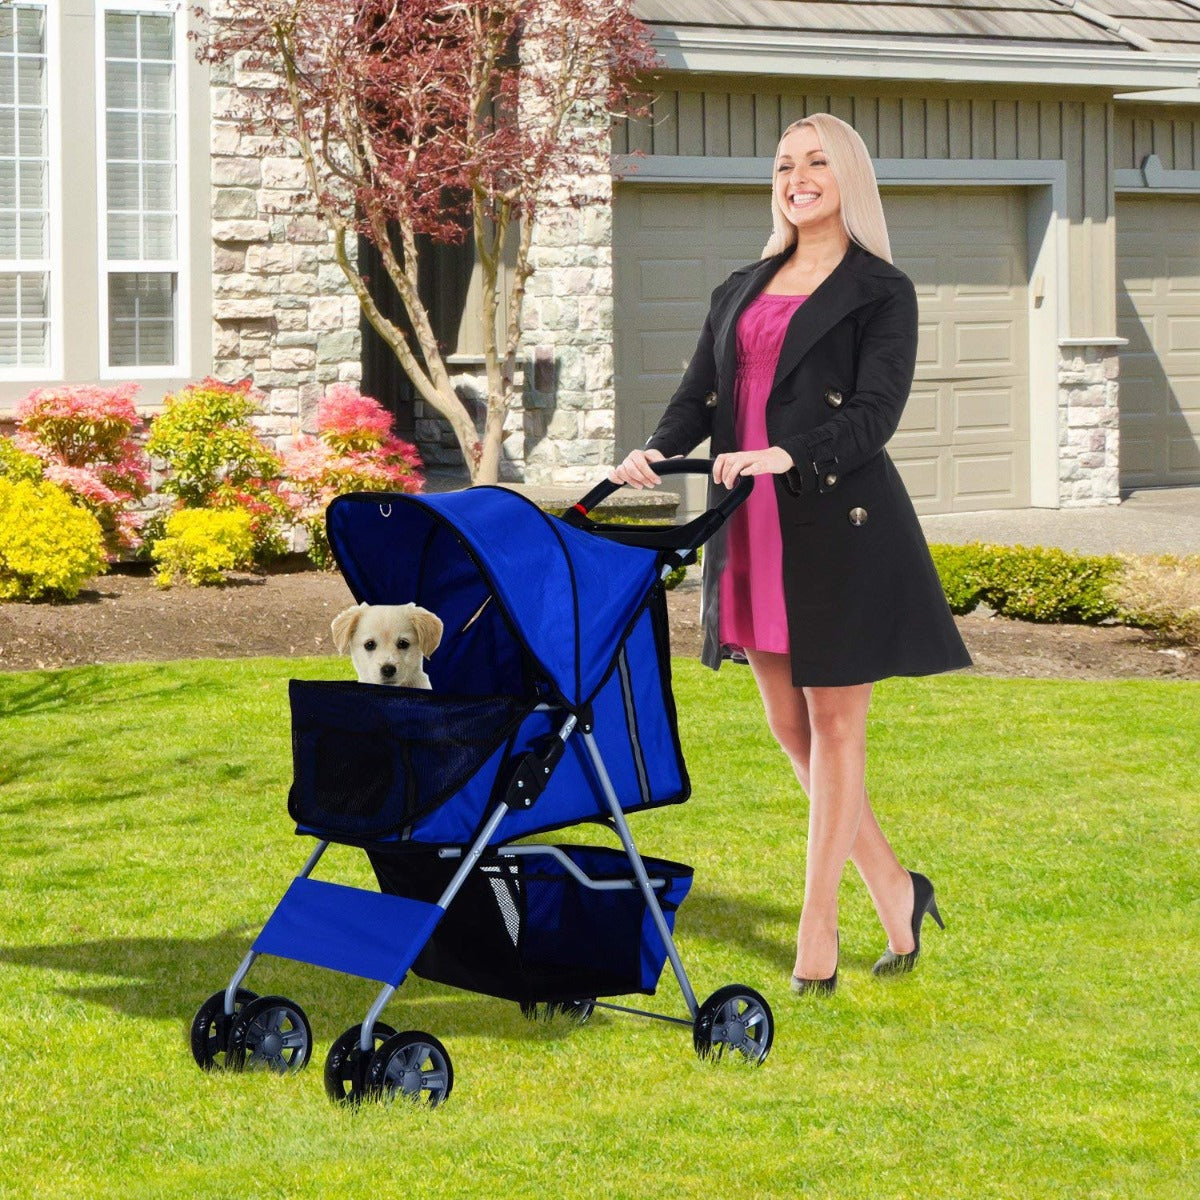 Dogs 600D Oxford Cloth Pram Blue - Suitable for Small Pets